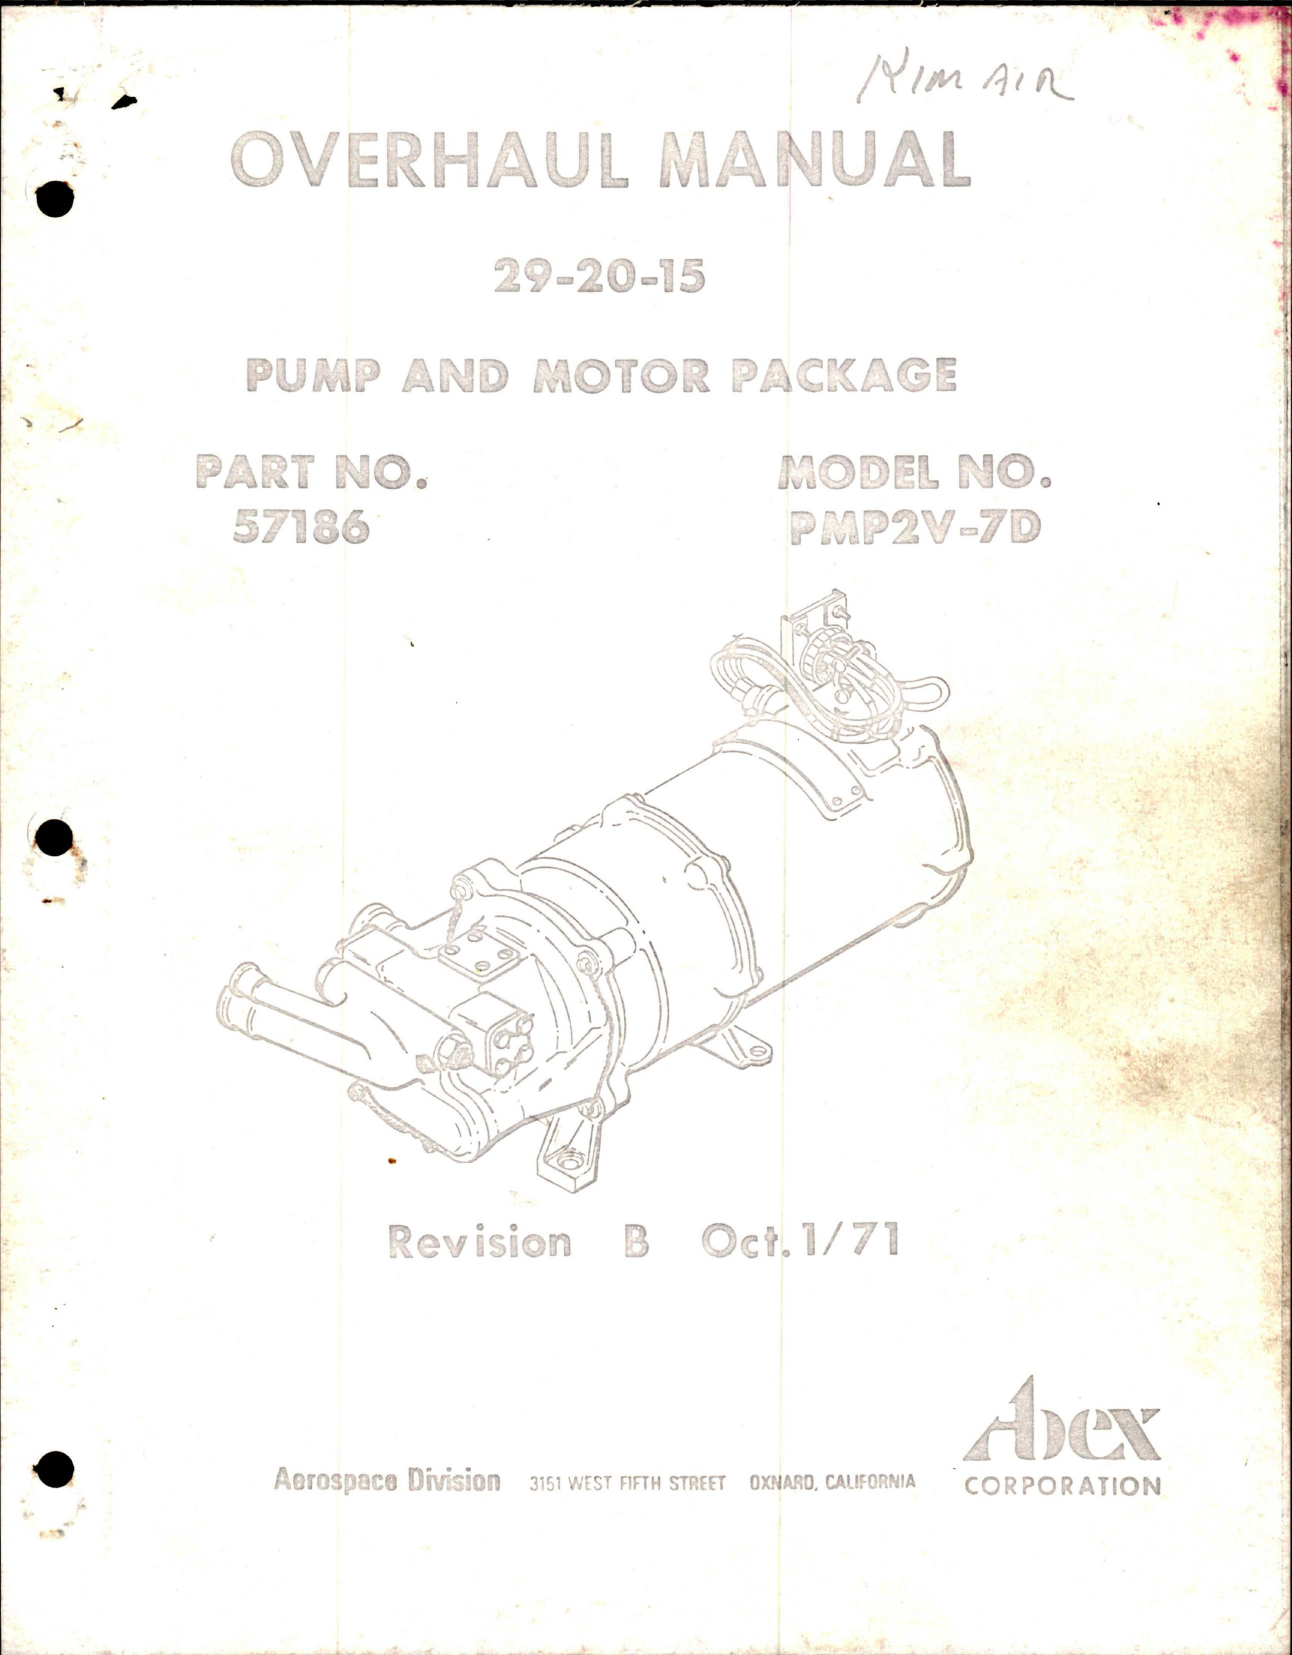 Sample page 1 from AirCorps Library document: Overhaul Manual for Pump and Motor Package - Part 57186 - Model PMP2V-7D 